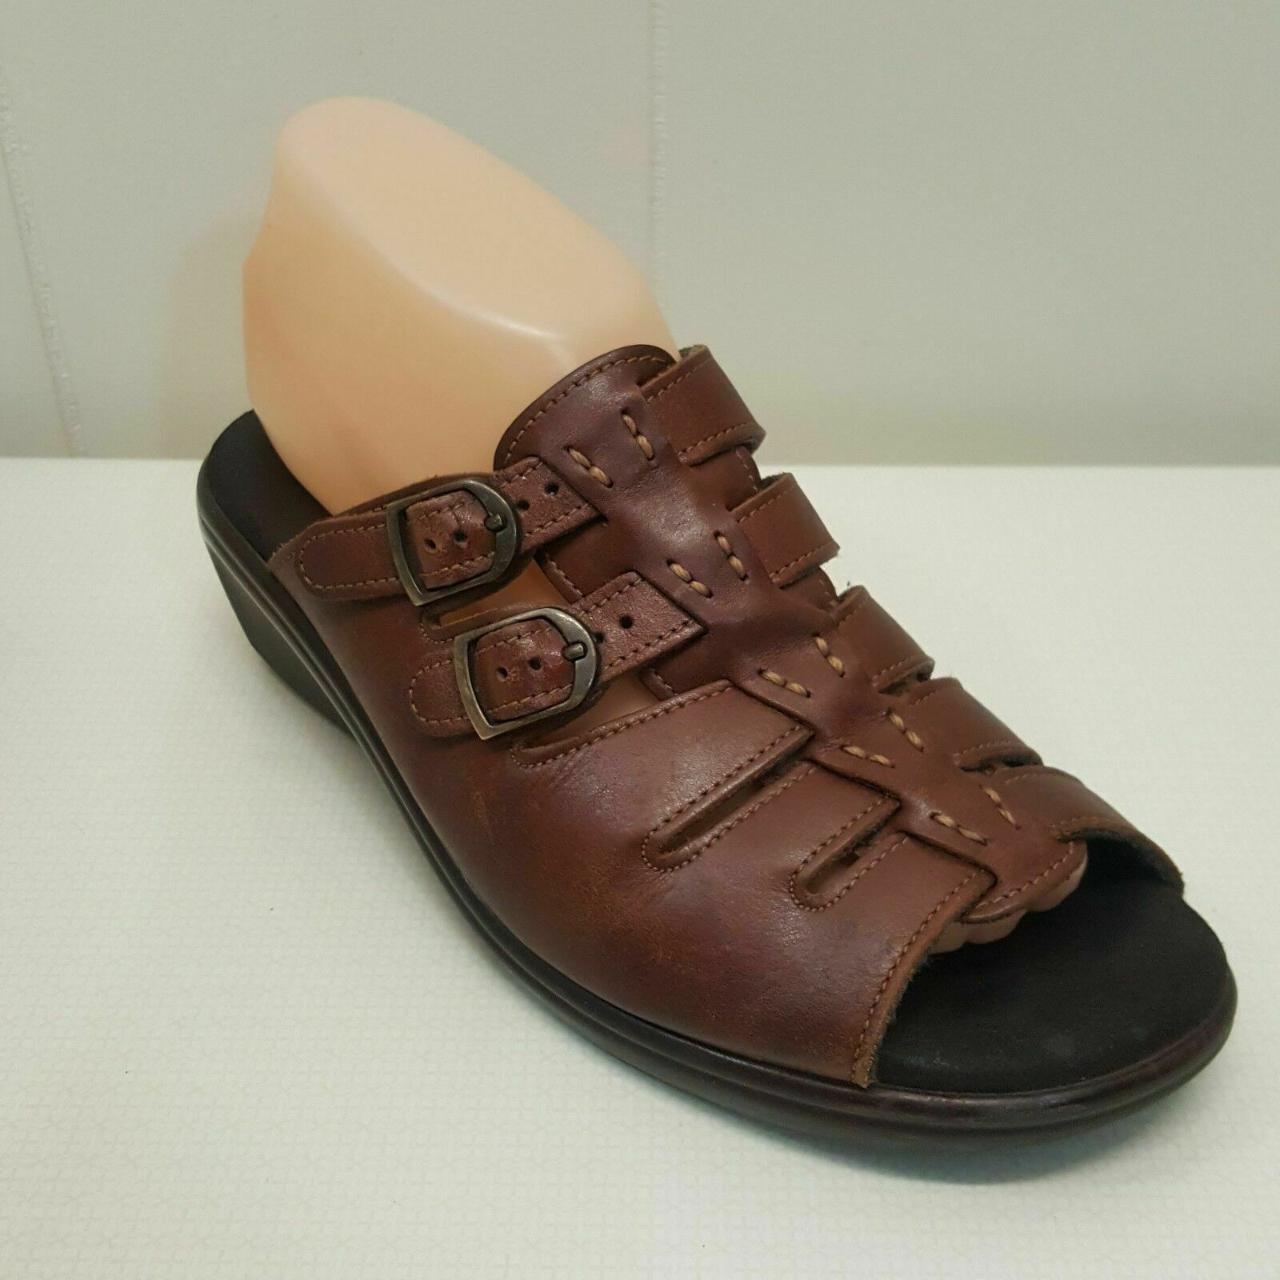 SAS Flat (Under 1 in) Leather Upper Sandals for Women for sale | eBay